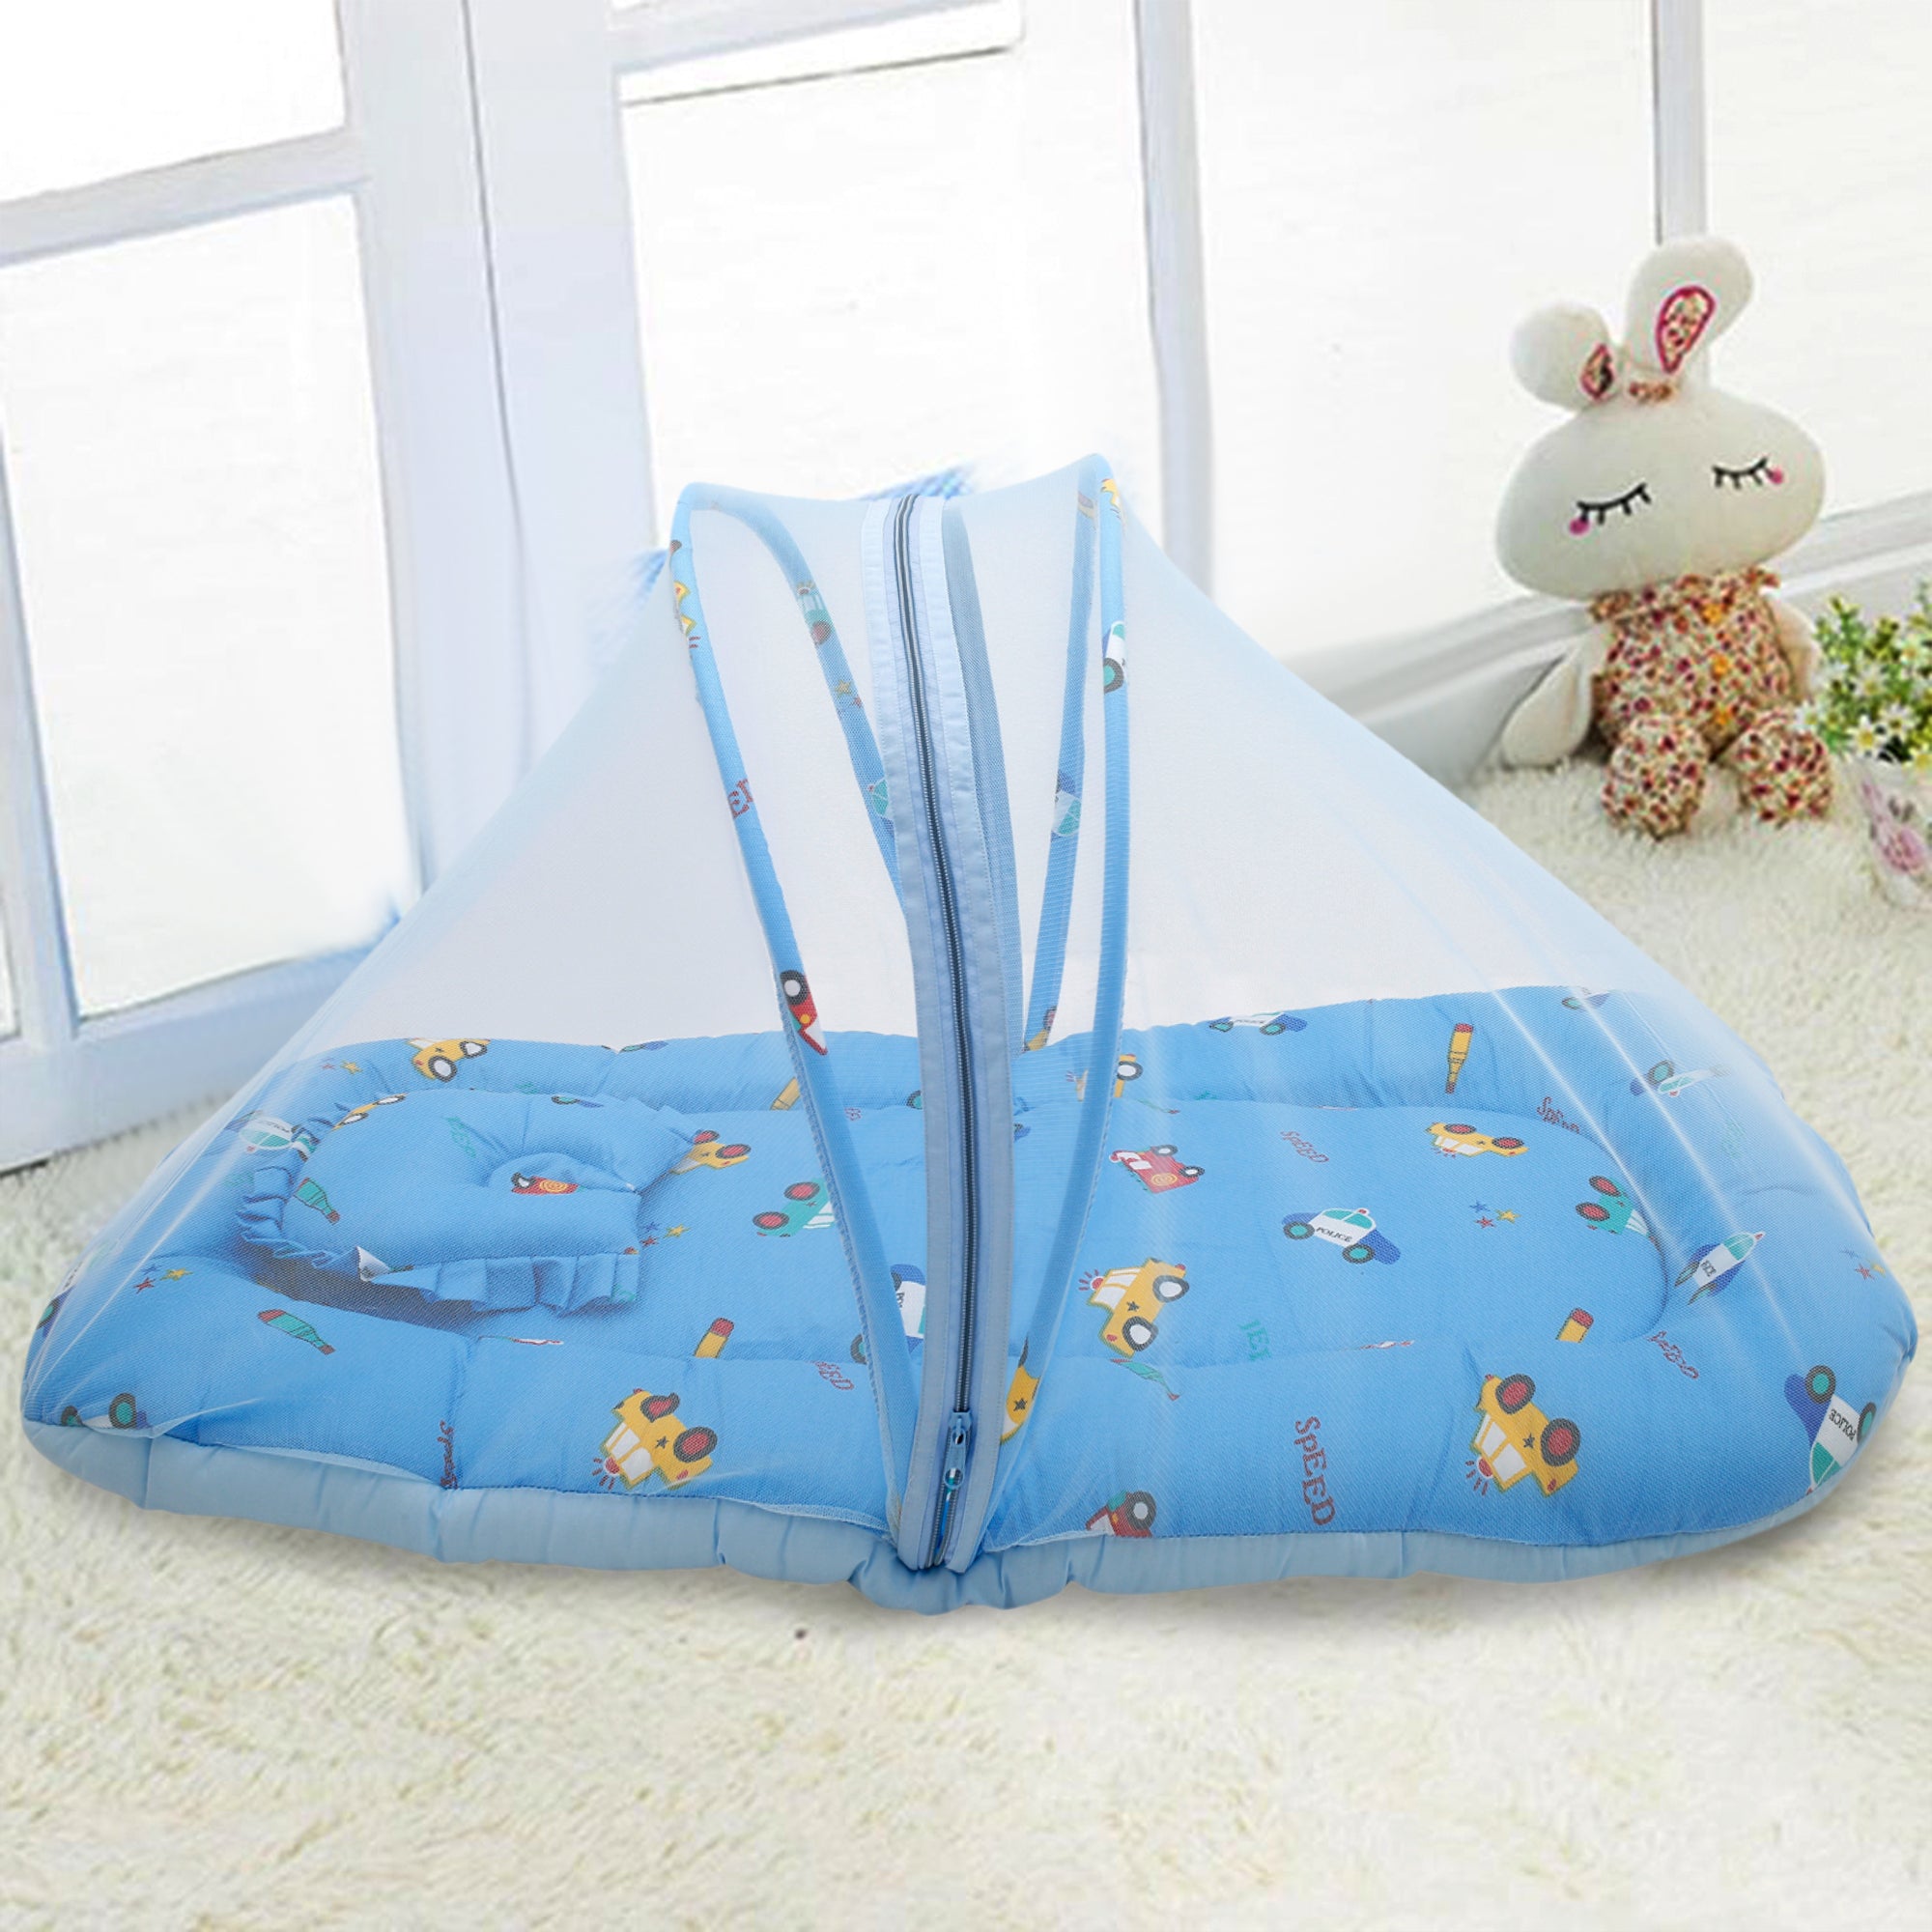 Mosquito Net Tent Mattress Set With Neck Pillow Catch Me If You Can Blue - Baby Moo